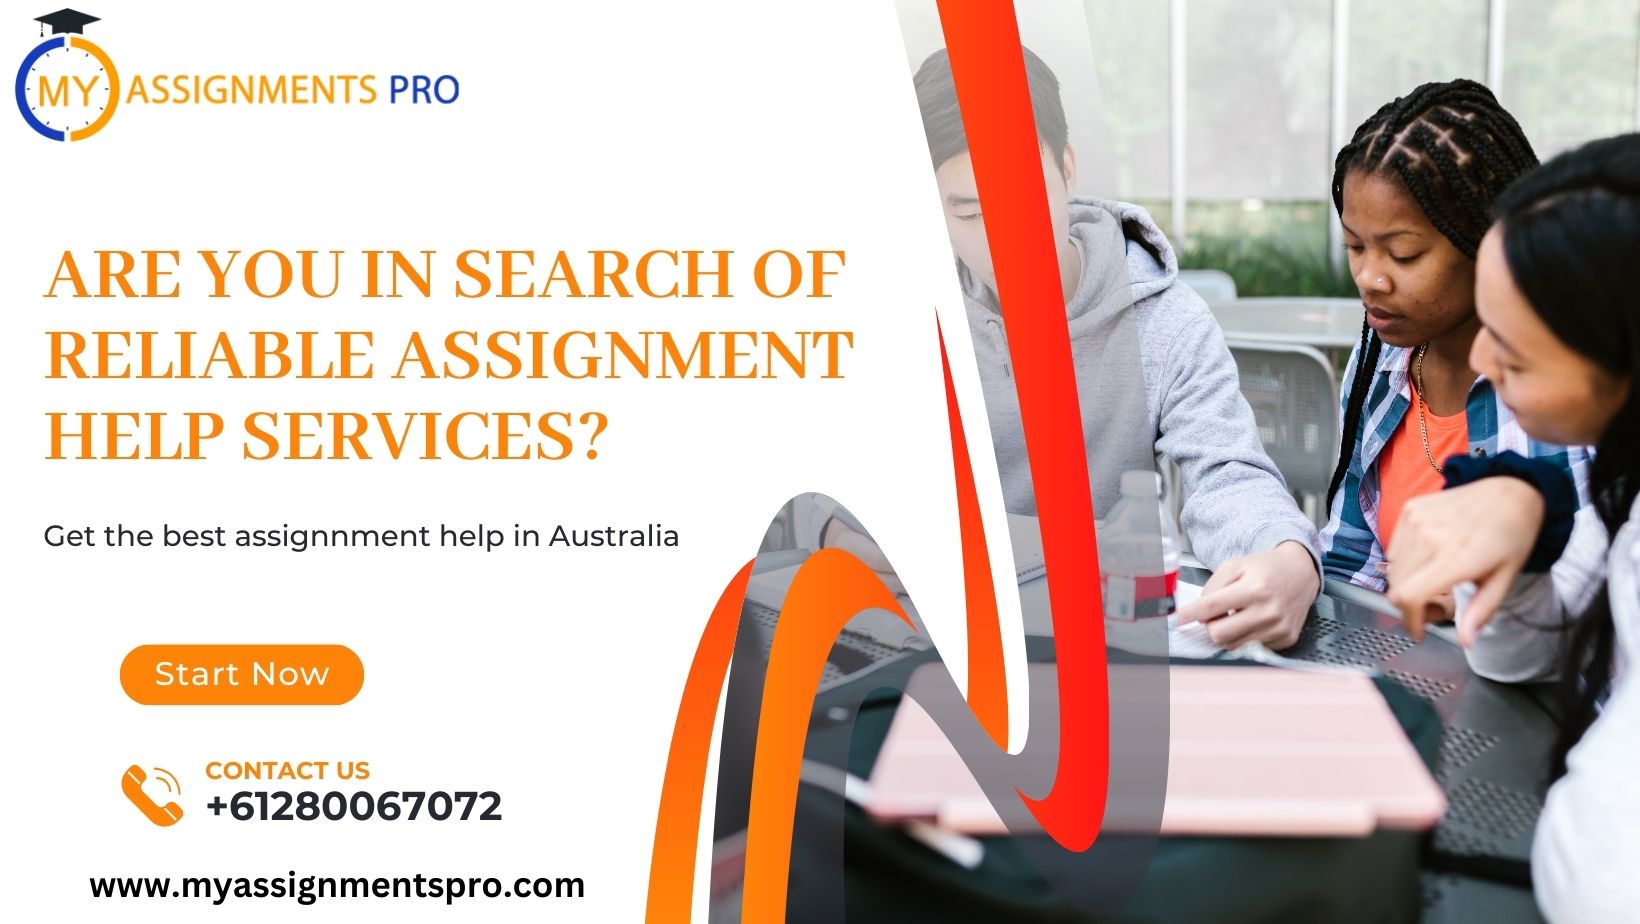 Are you in Search of Reliable Assignment Help Services?